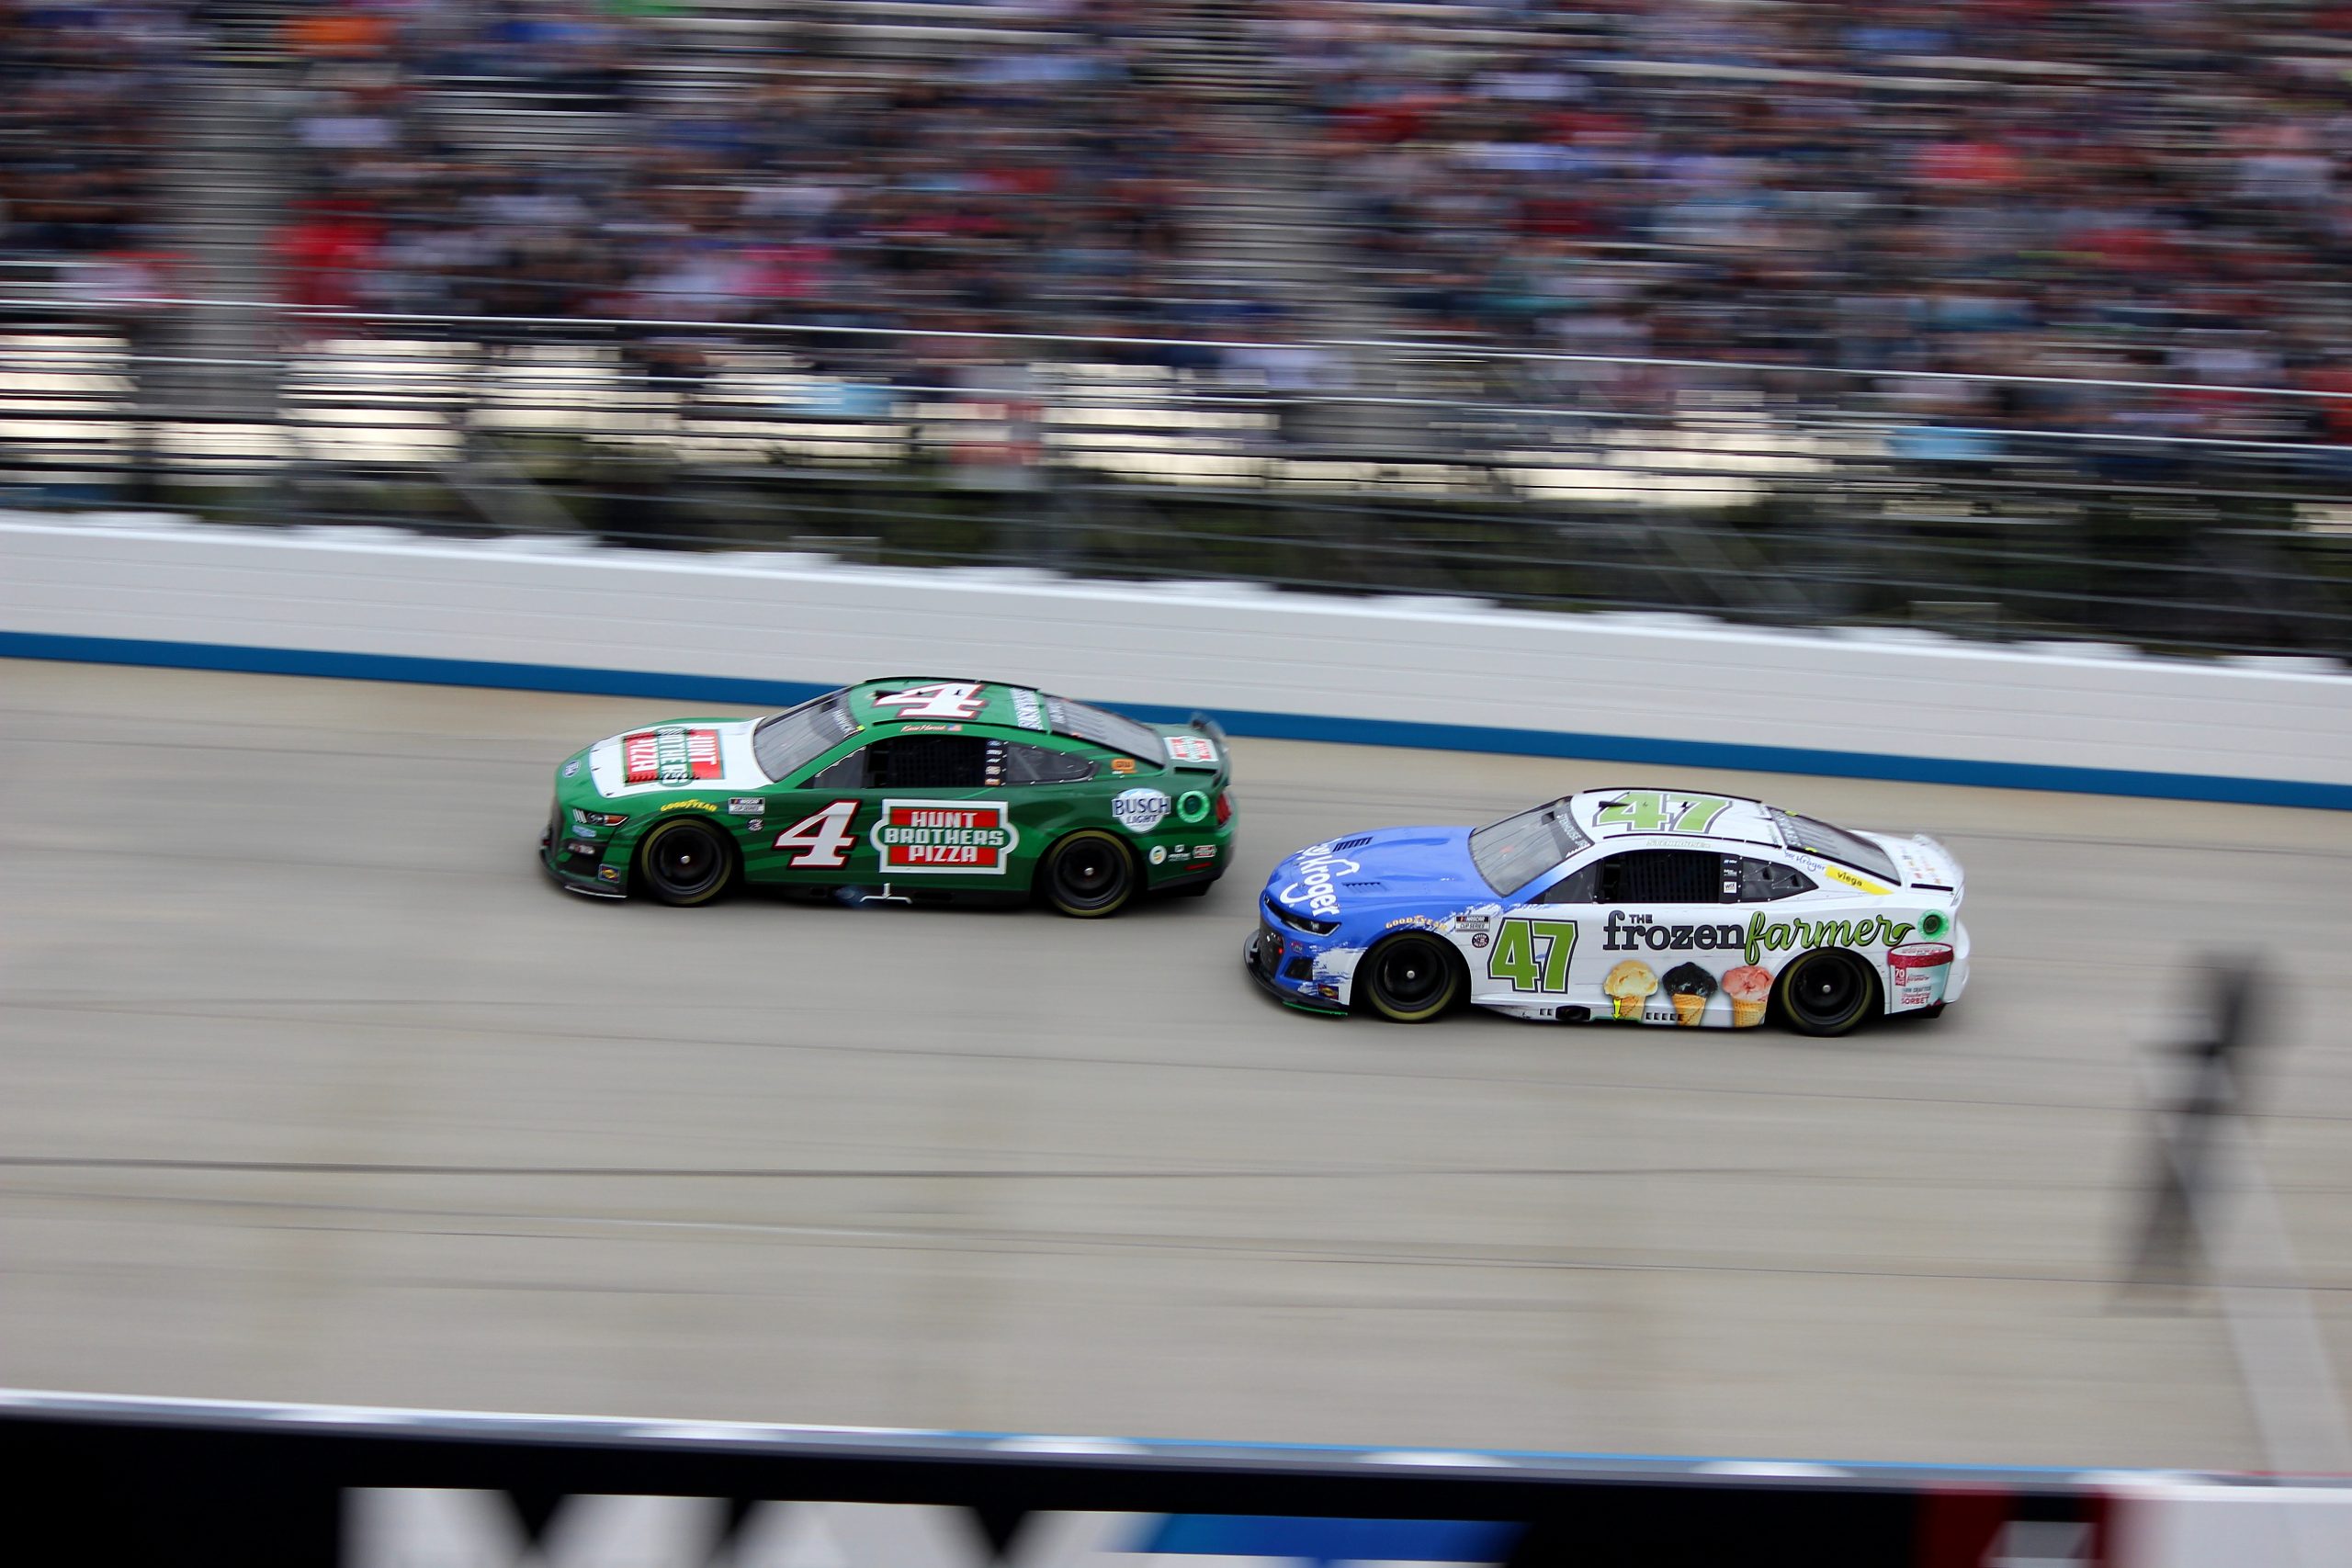 Perhaps the good times are rolling soon for Stenhouse and his No. 47 team. (Photo: Josh Jones | The Podium Finish)